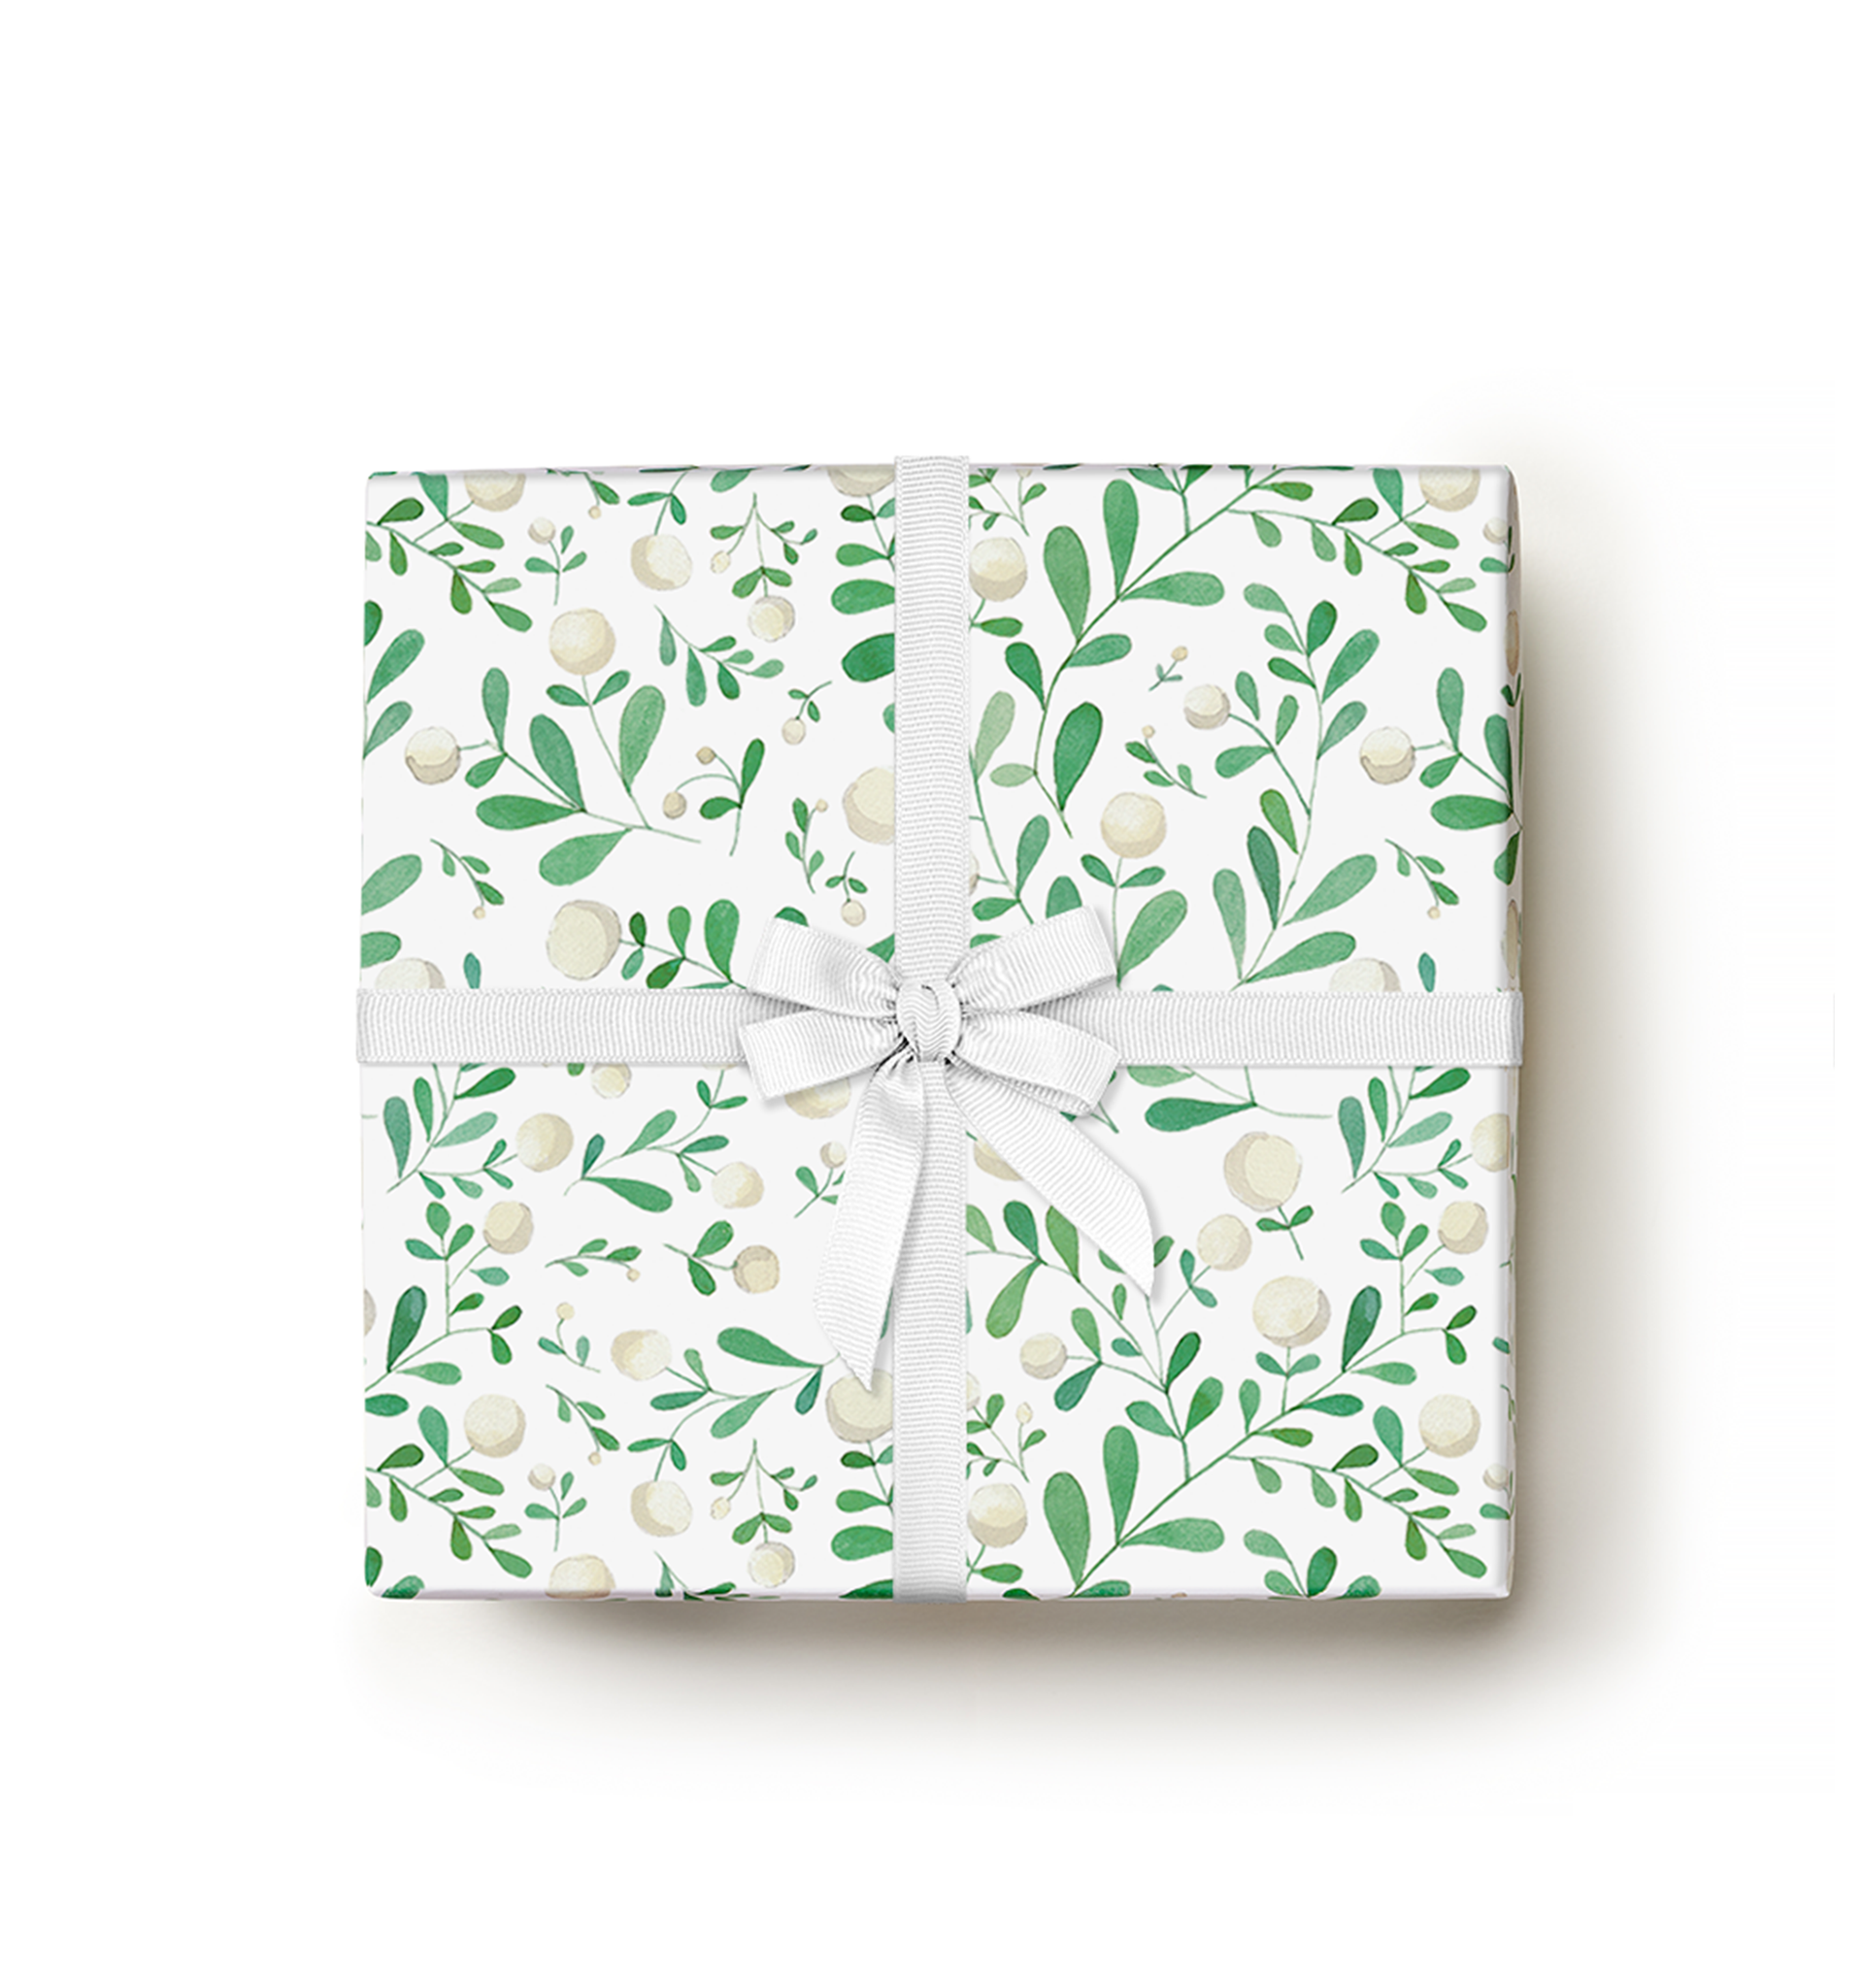 RUSPEPA Gift Wrapping Paper Sheets - Floral Design India | Ubuy